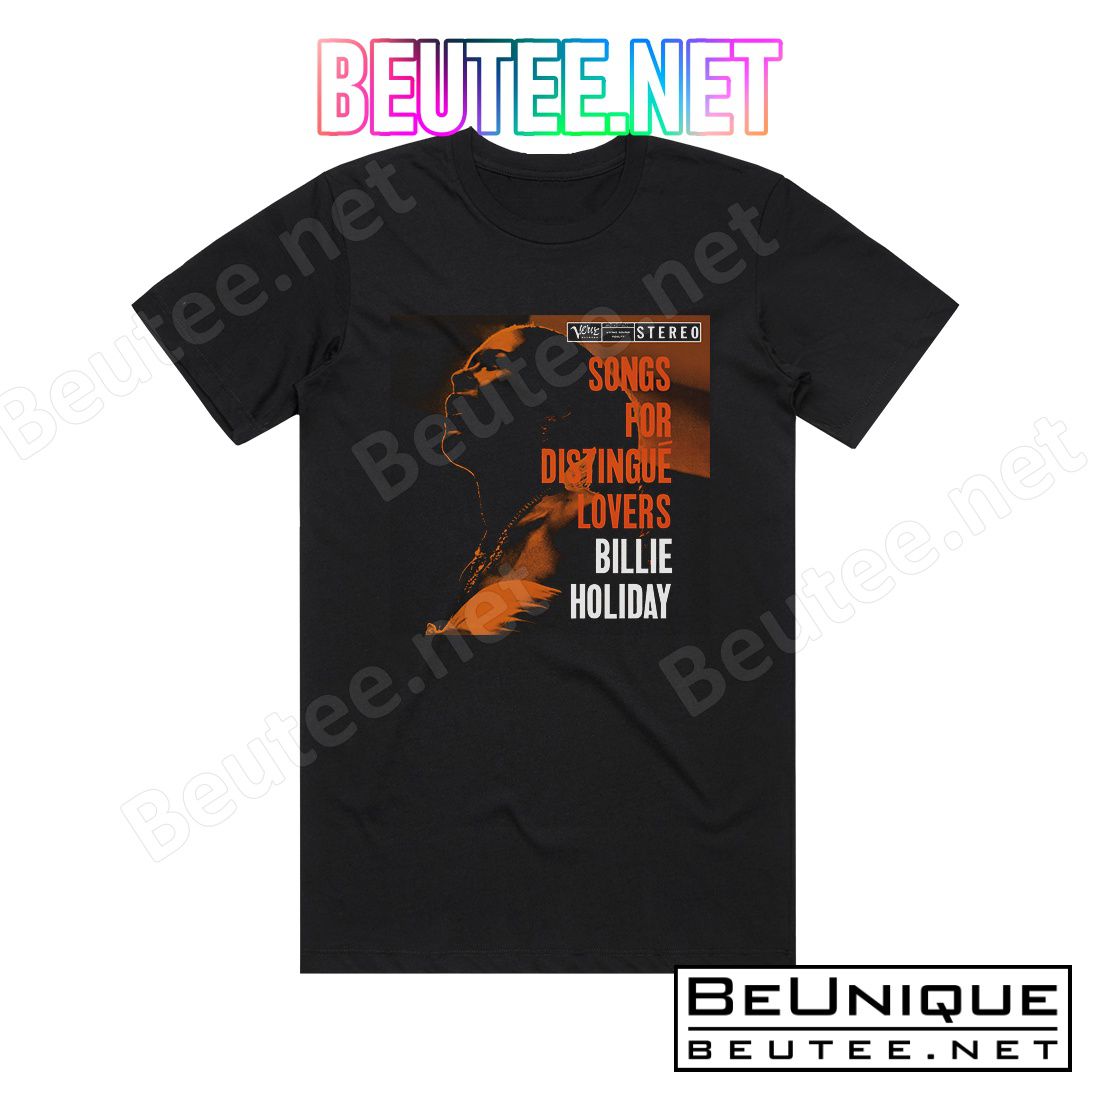 Billie Holiday Songs For Distingue Lovers 1 Album Cover T-Shirt